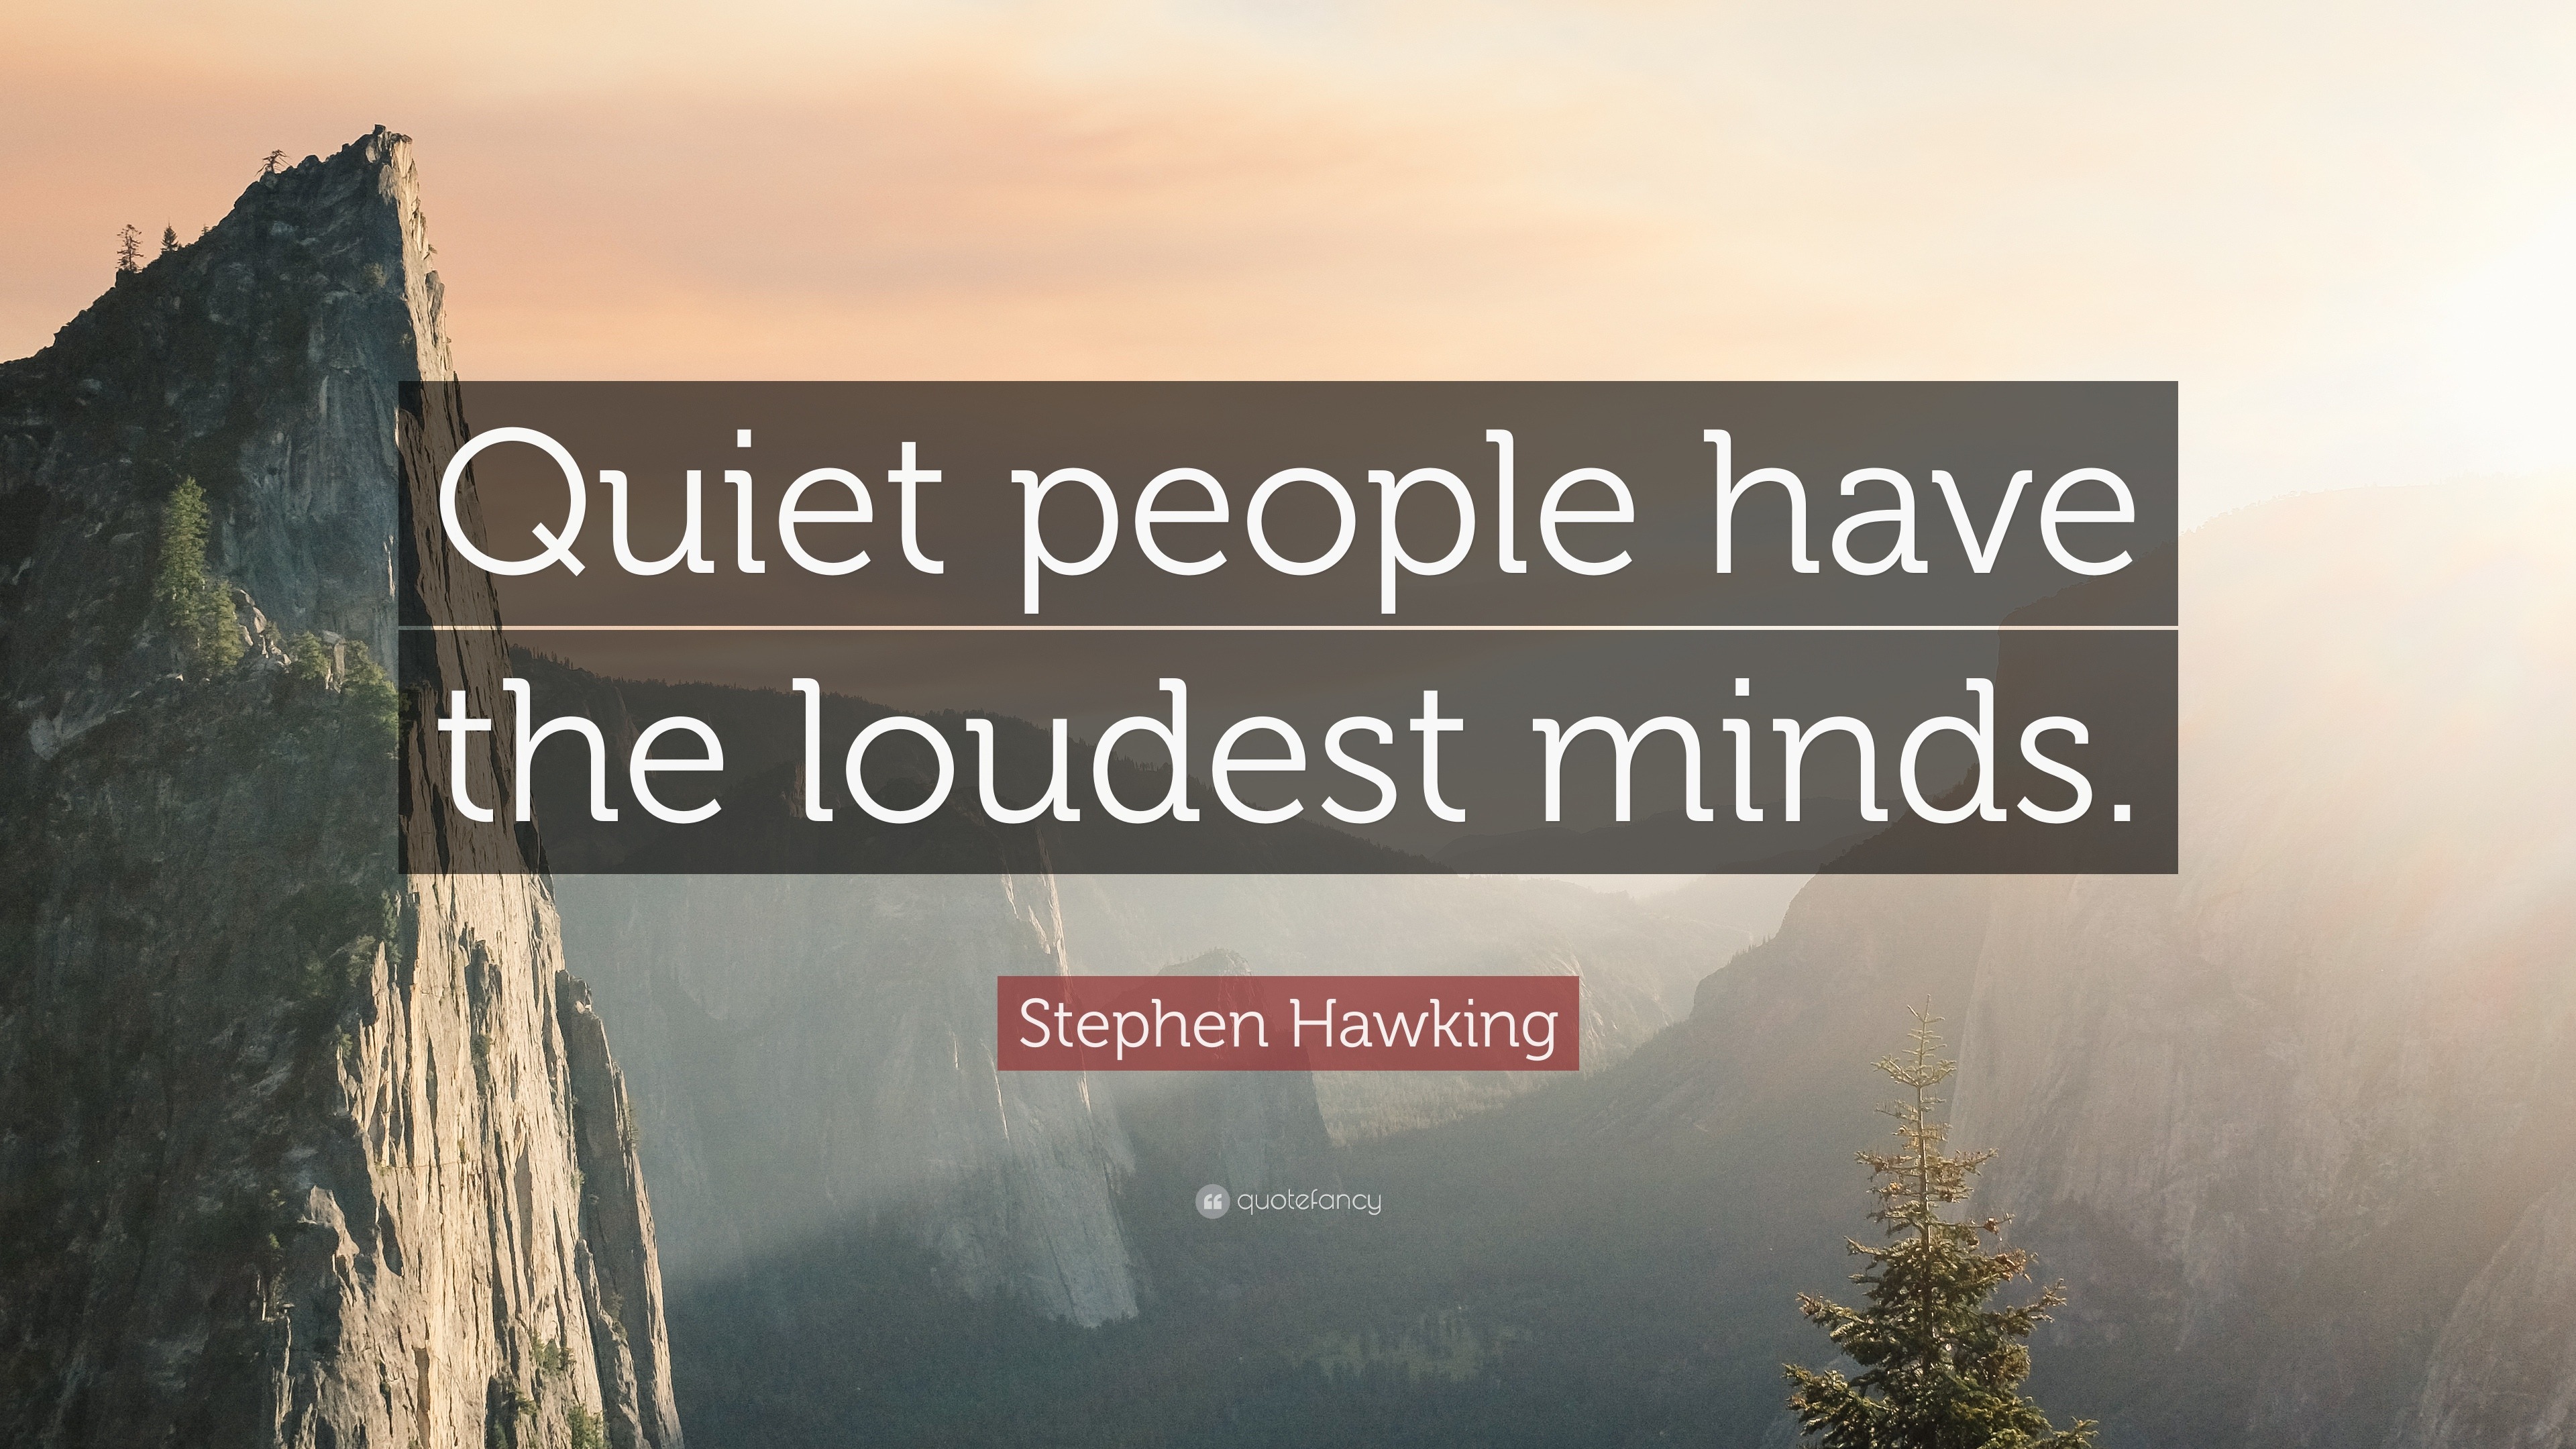 Stephen Hawking Quote: “Quiet people have the loudest minds.” (23